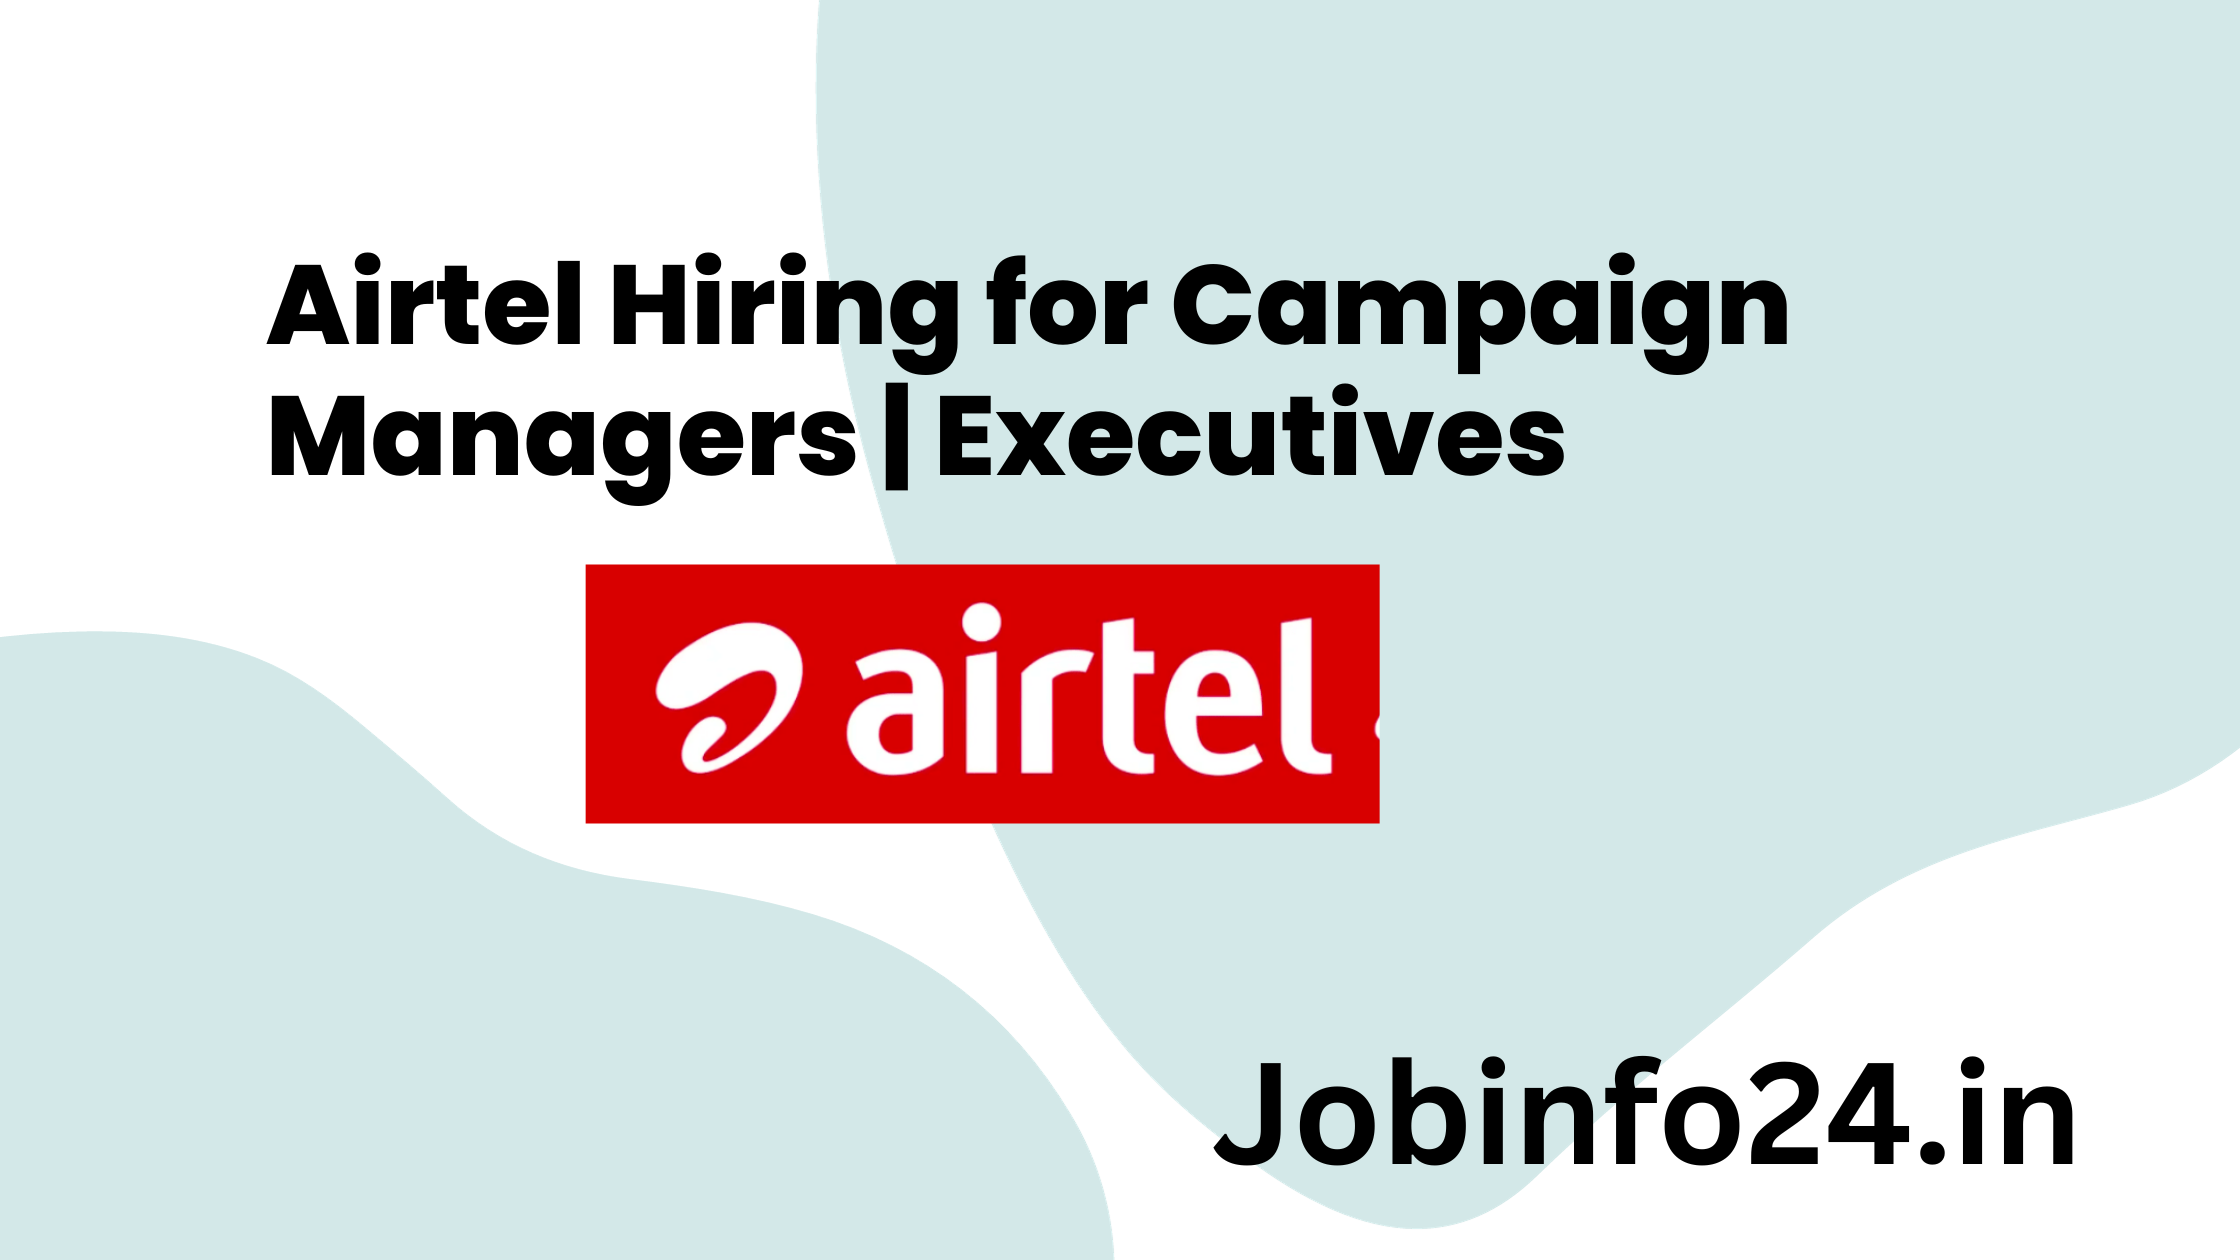 Airtel Hiring for Campaign Managers | Executives